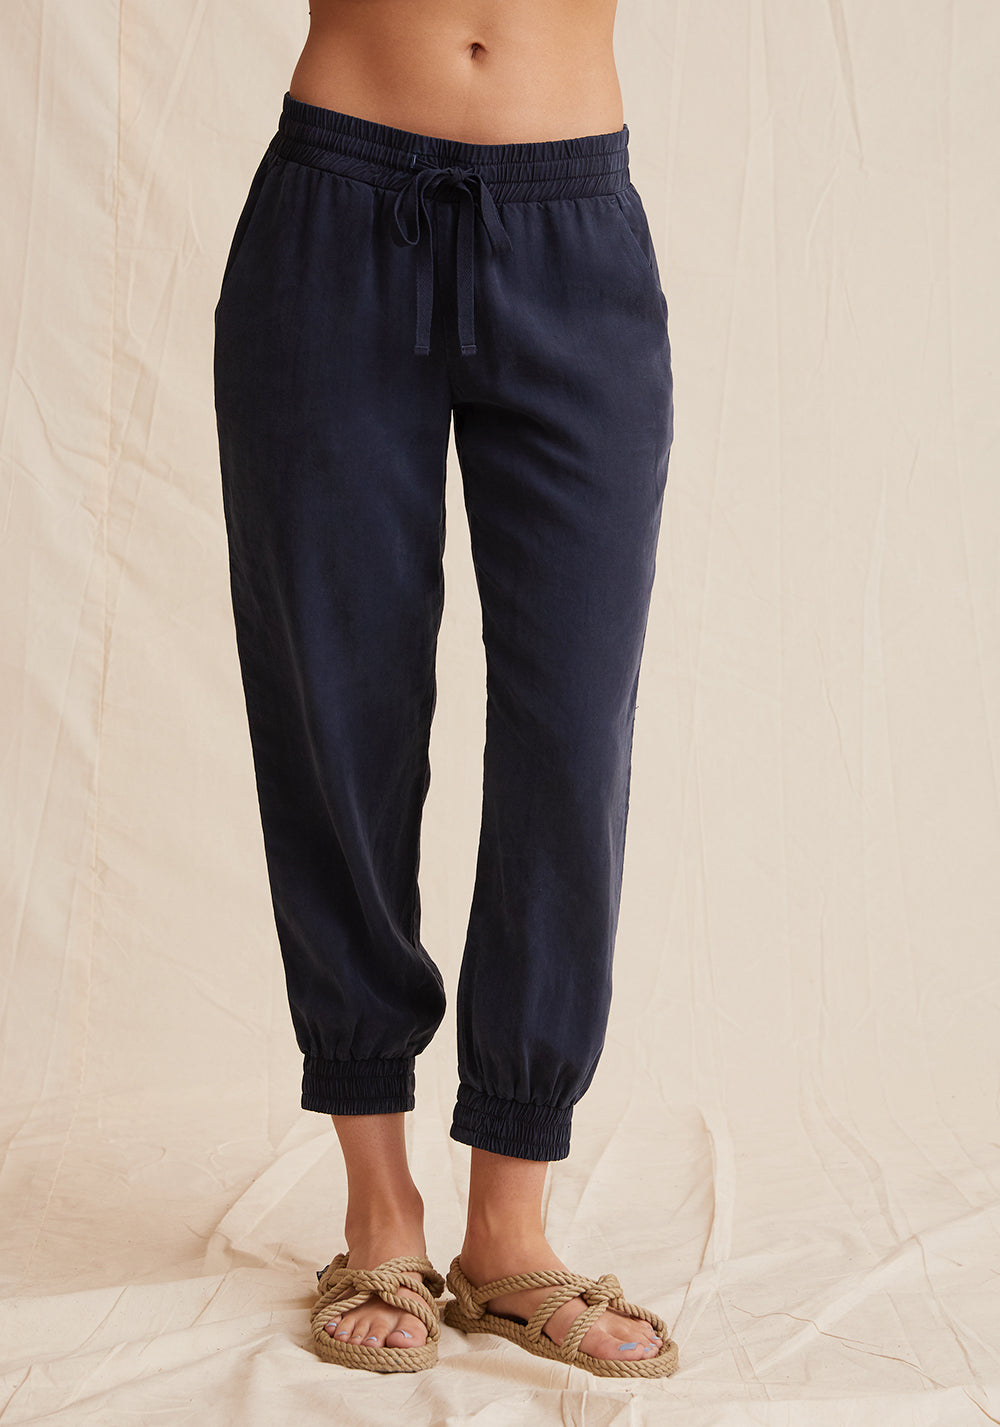 The Jogger Pant from Bella Dahl is a relaxed, everyday pant.  It features a drawstring waist, side pockets and elasticated cuffs. Aprilmae designer womenswear in Chiswick.